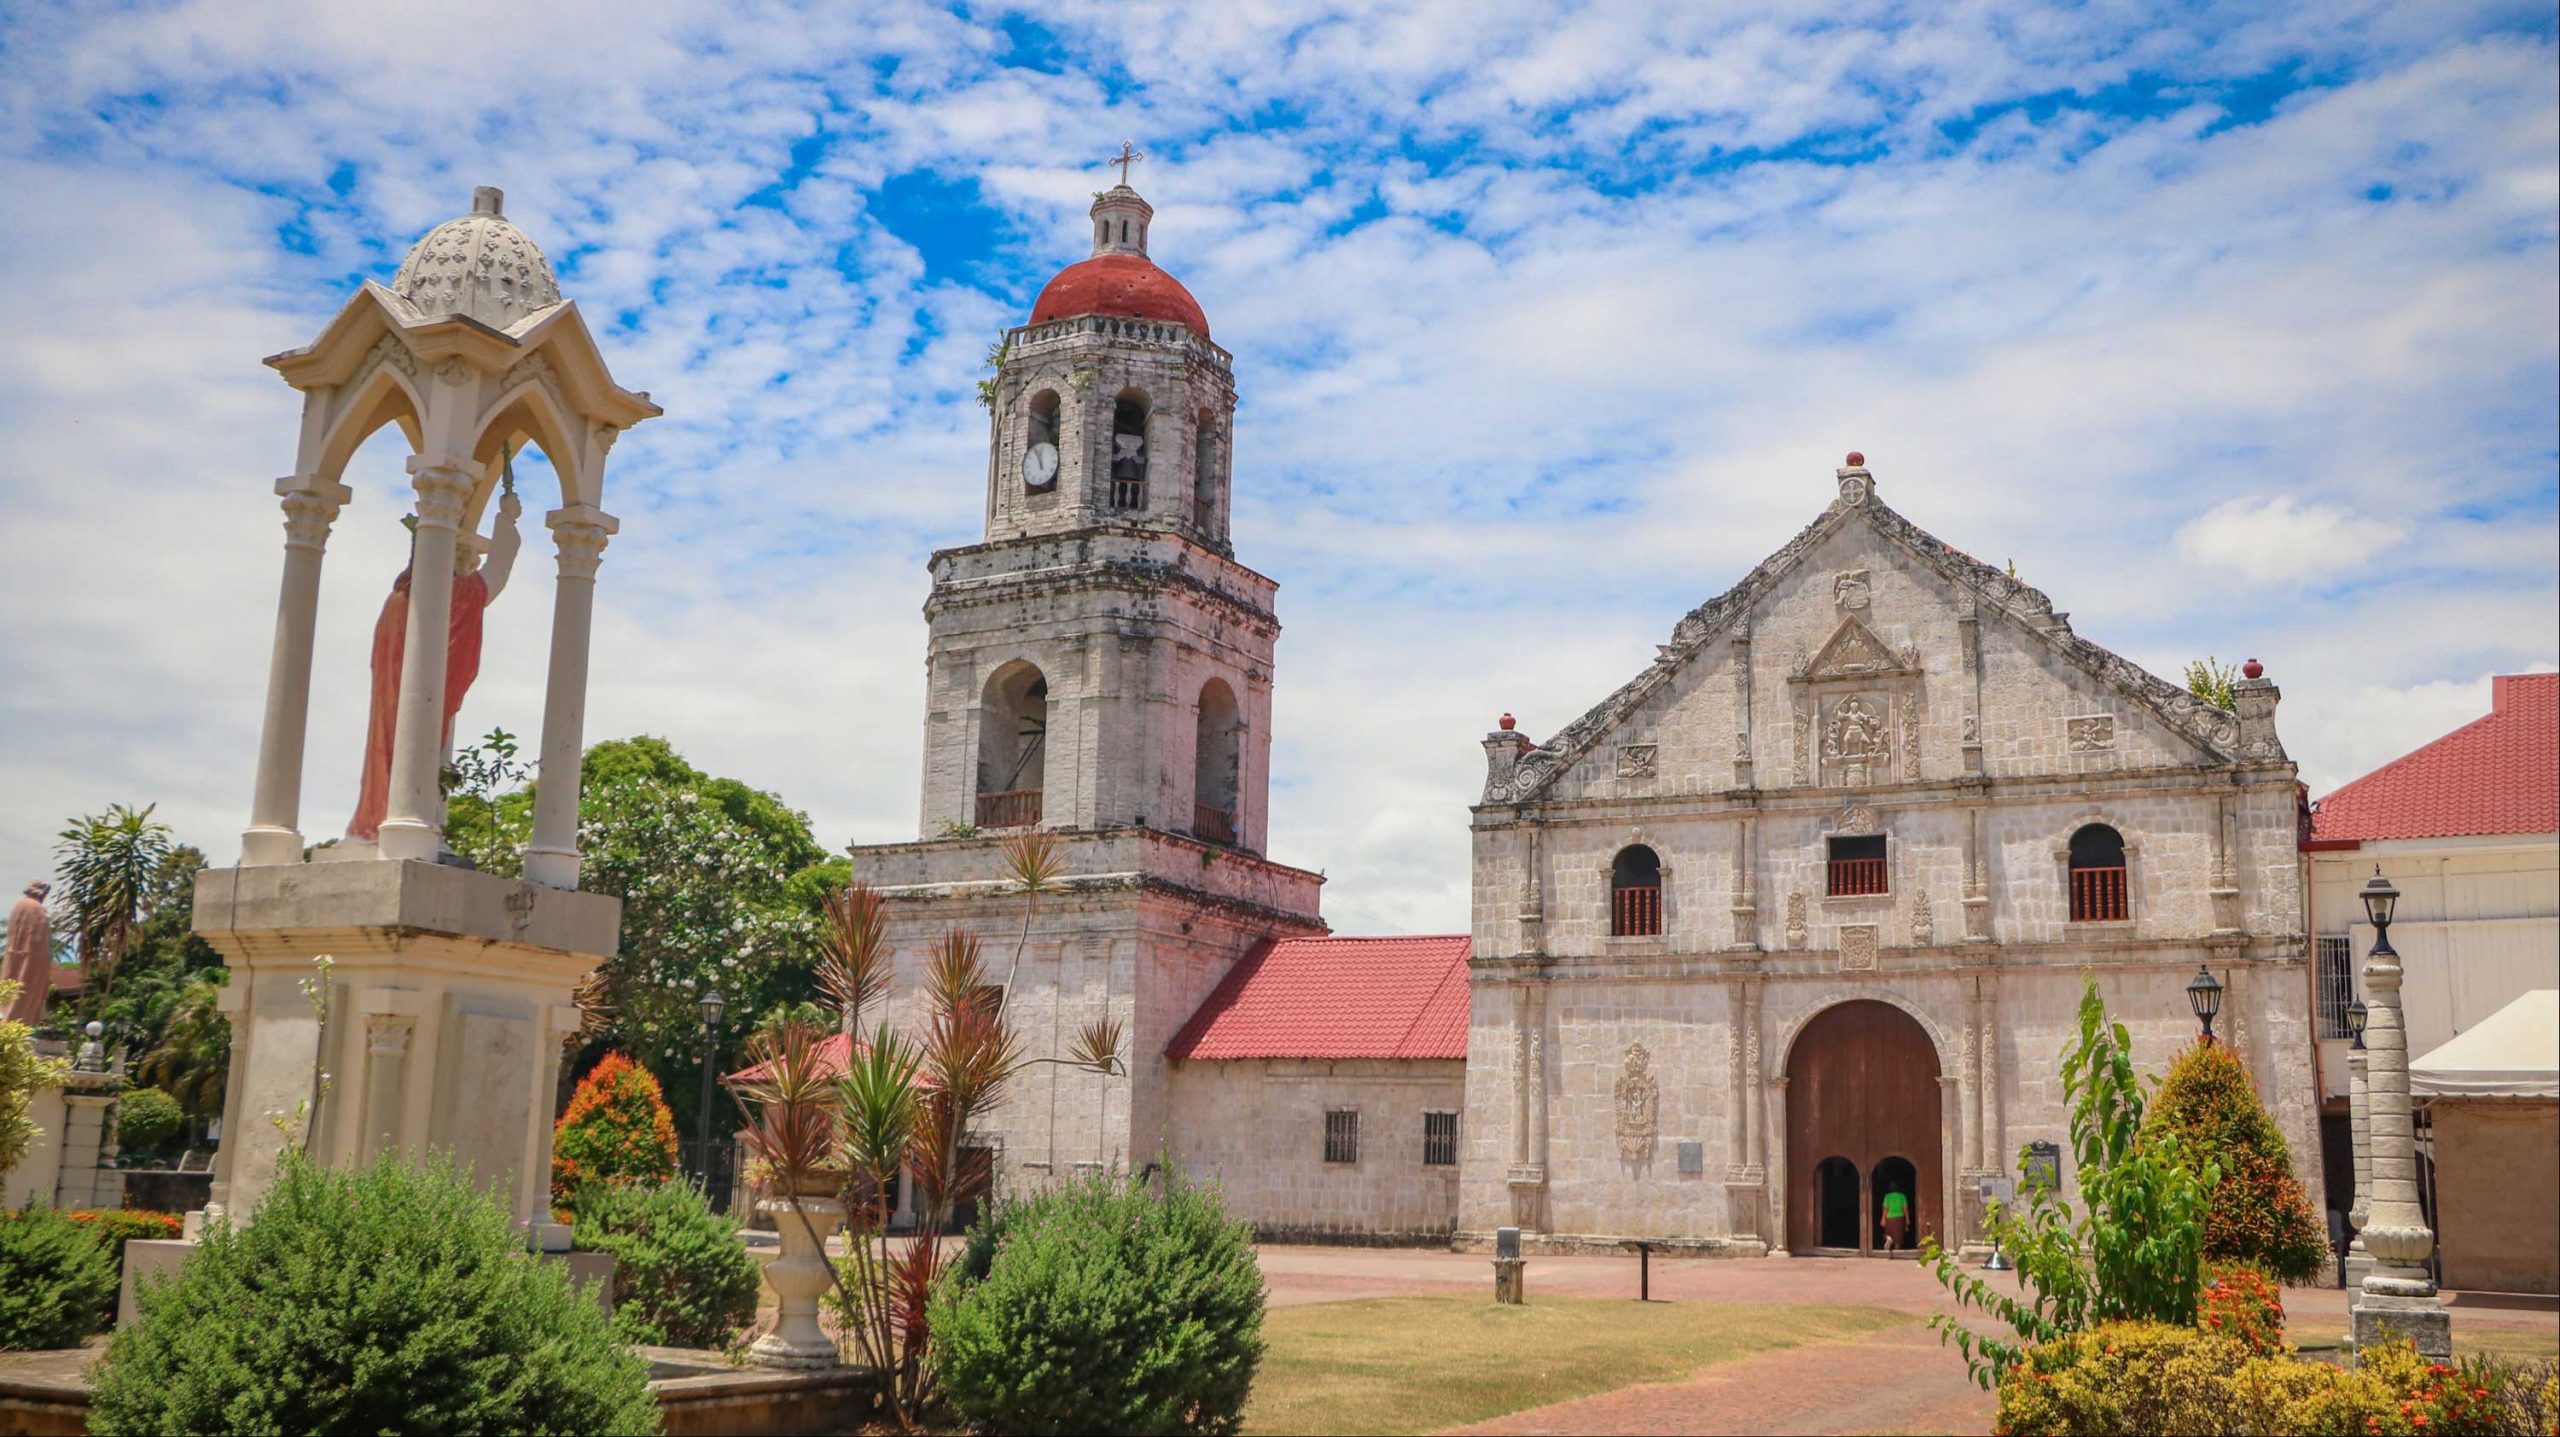 IN ARGAO. The Archdiocesan Shrine of St. Michael in Argao, southern Cebu is among the featured churches of the exhibit.